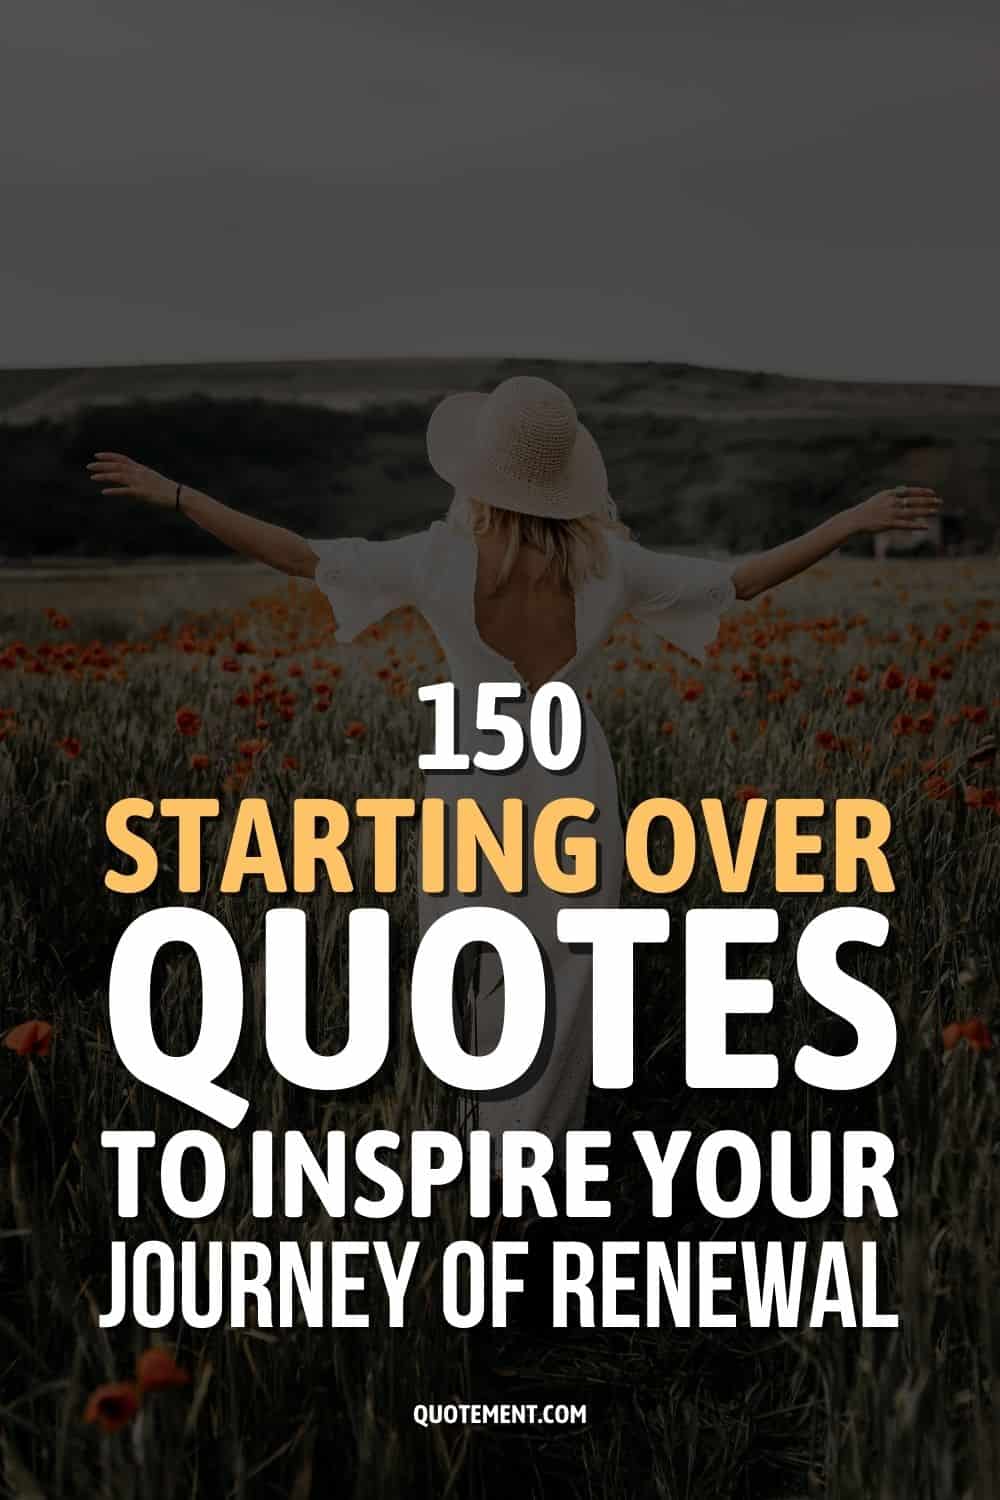 150 Starting Over Quotes To Inspire Your Journey Of Renewal
